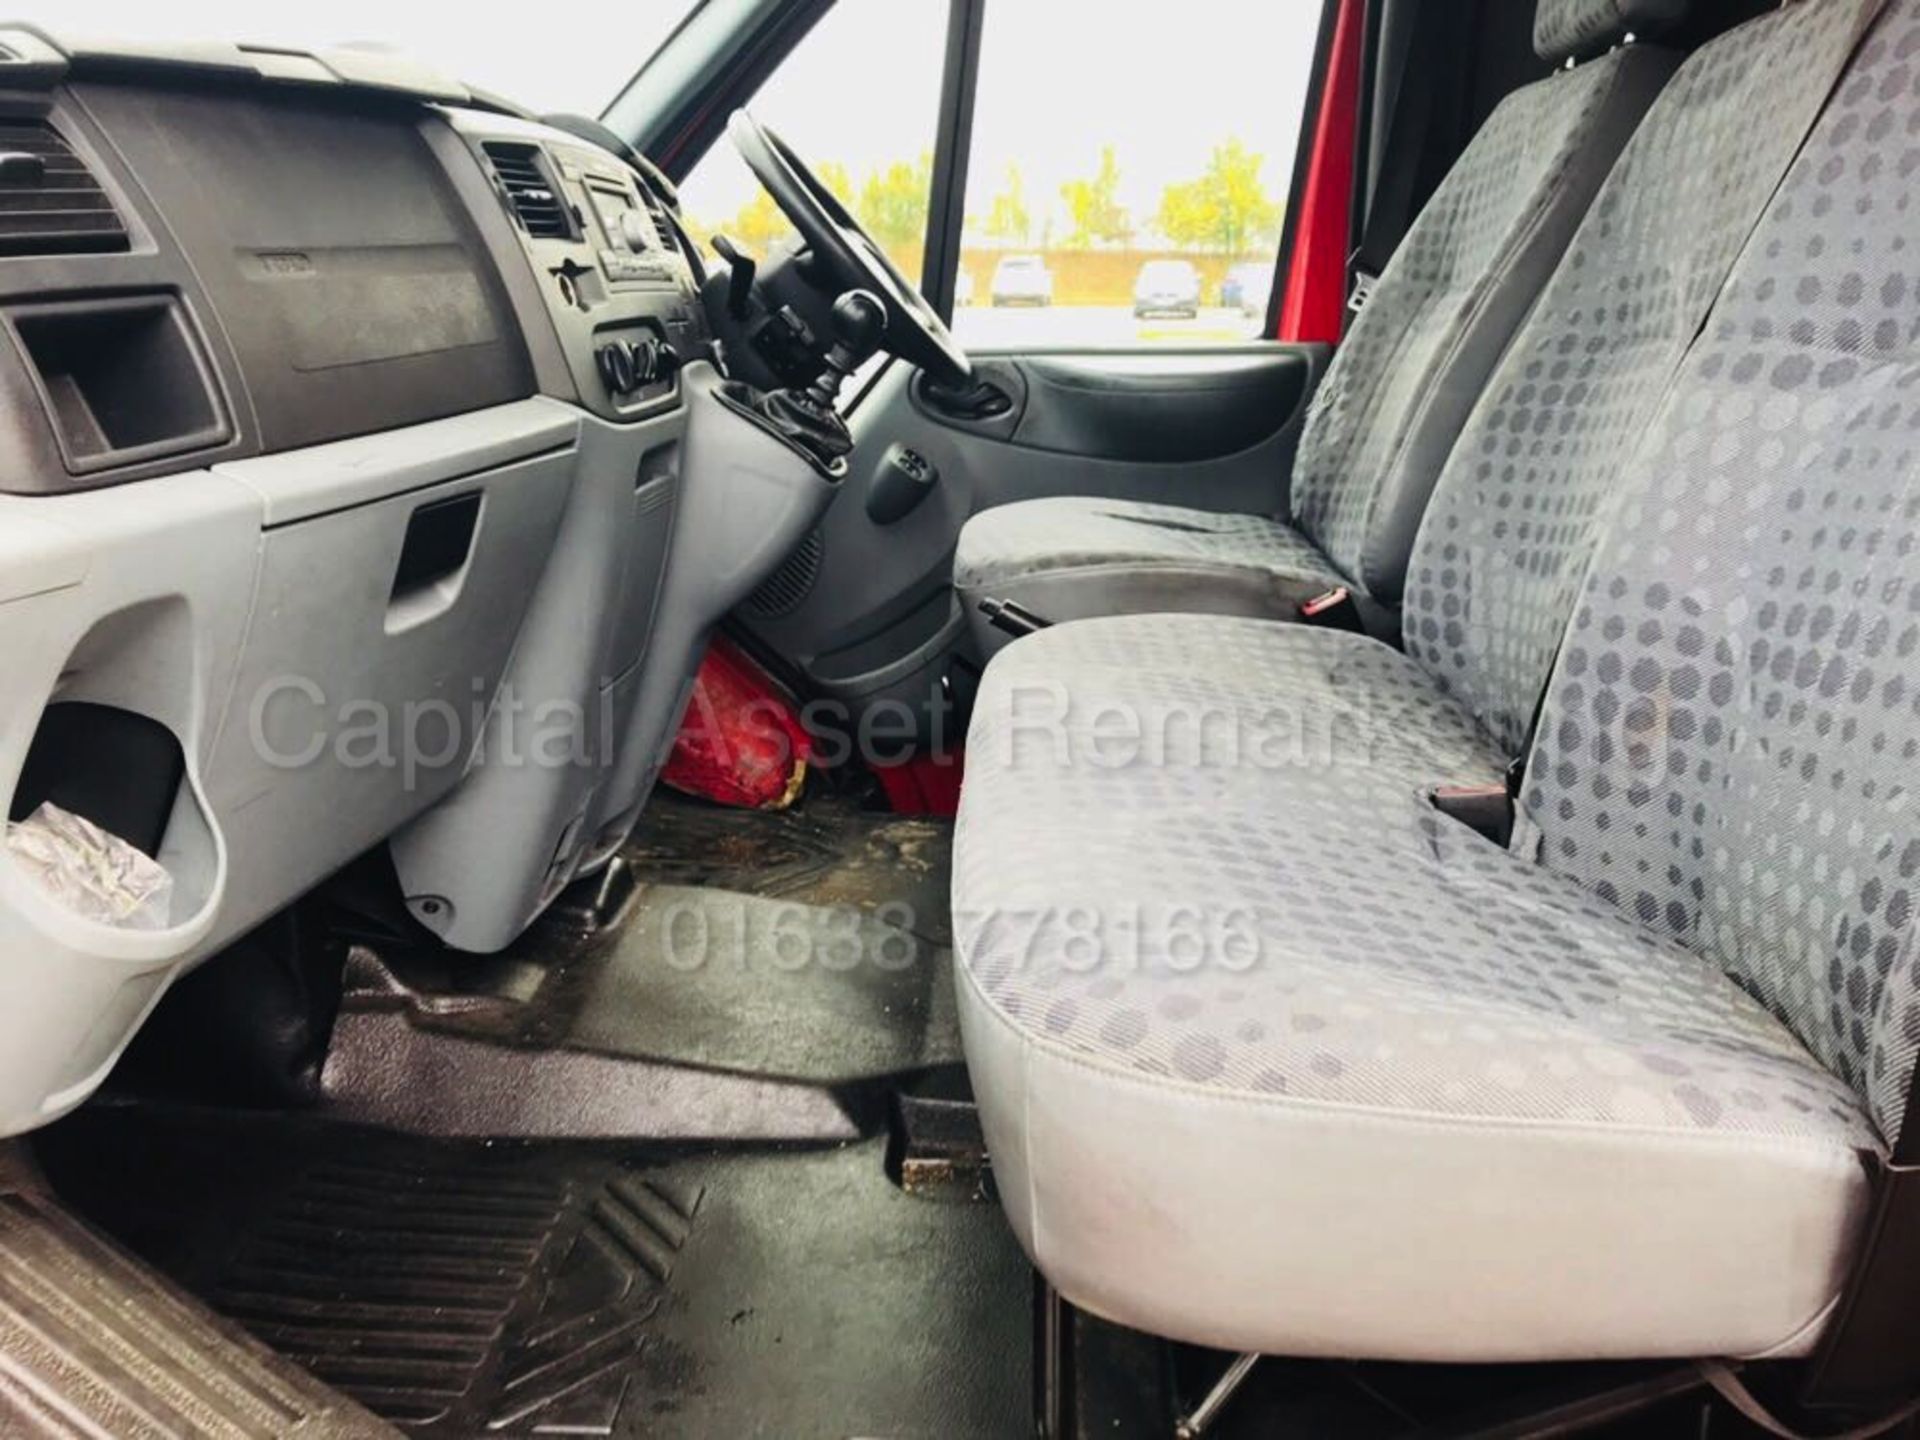 FORD TRANSIT T350L E/F 'XLWB HI-ROOF' (2009 MODEL) '2.4 TDCI - 115 PS - 6 SPEED' **AIR CON** - Image 14 of 30